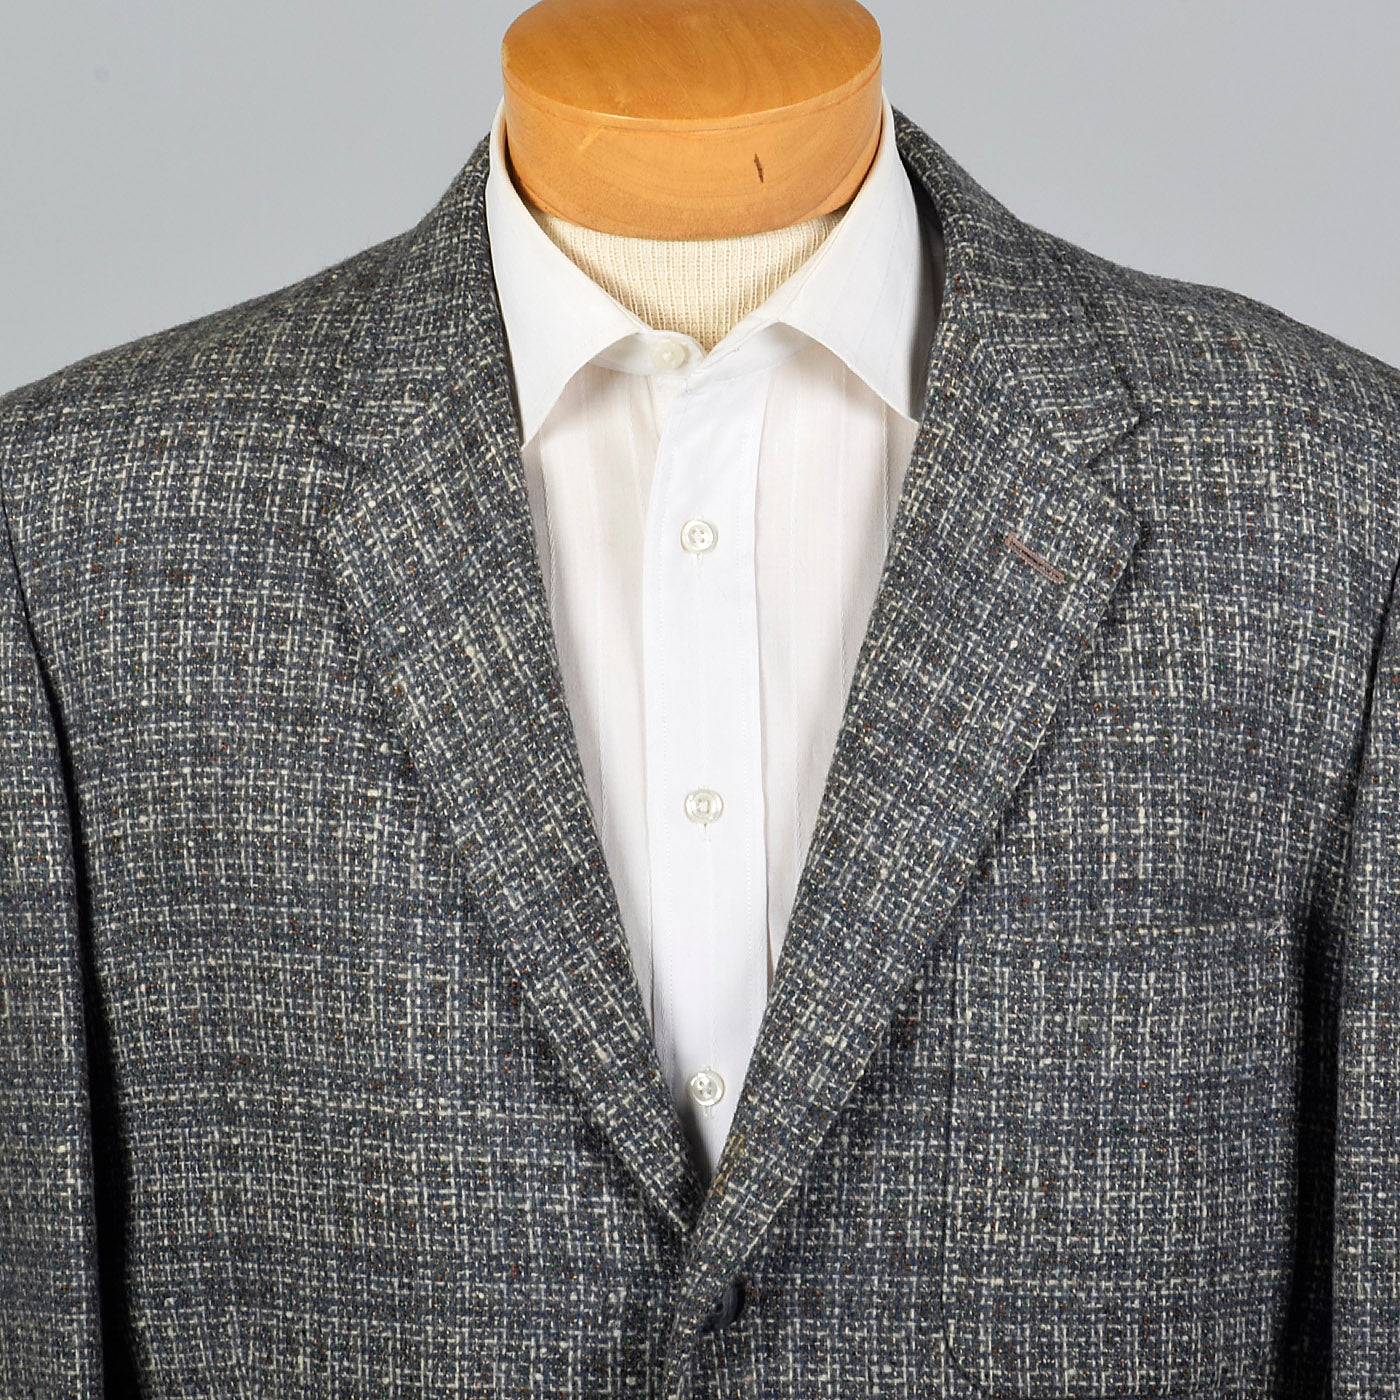 1950s Gray Tweed Jacket with Patch Pockets